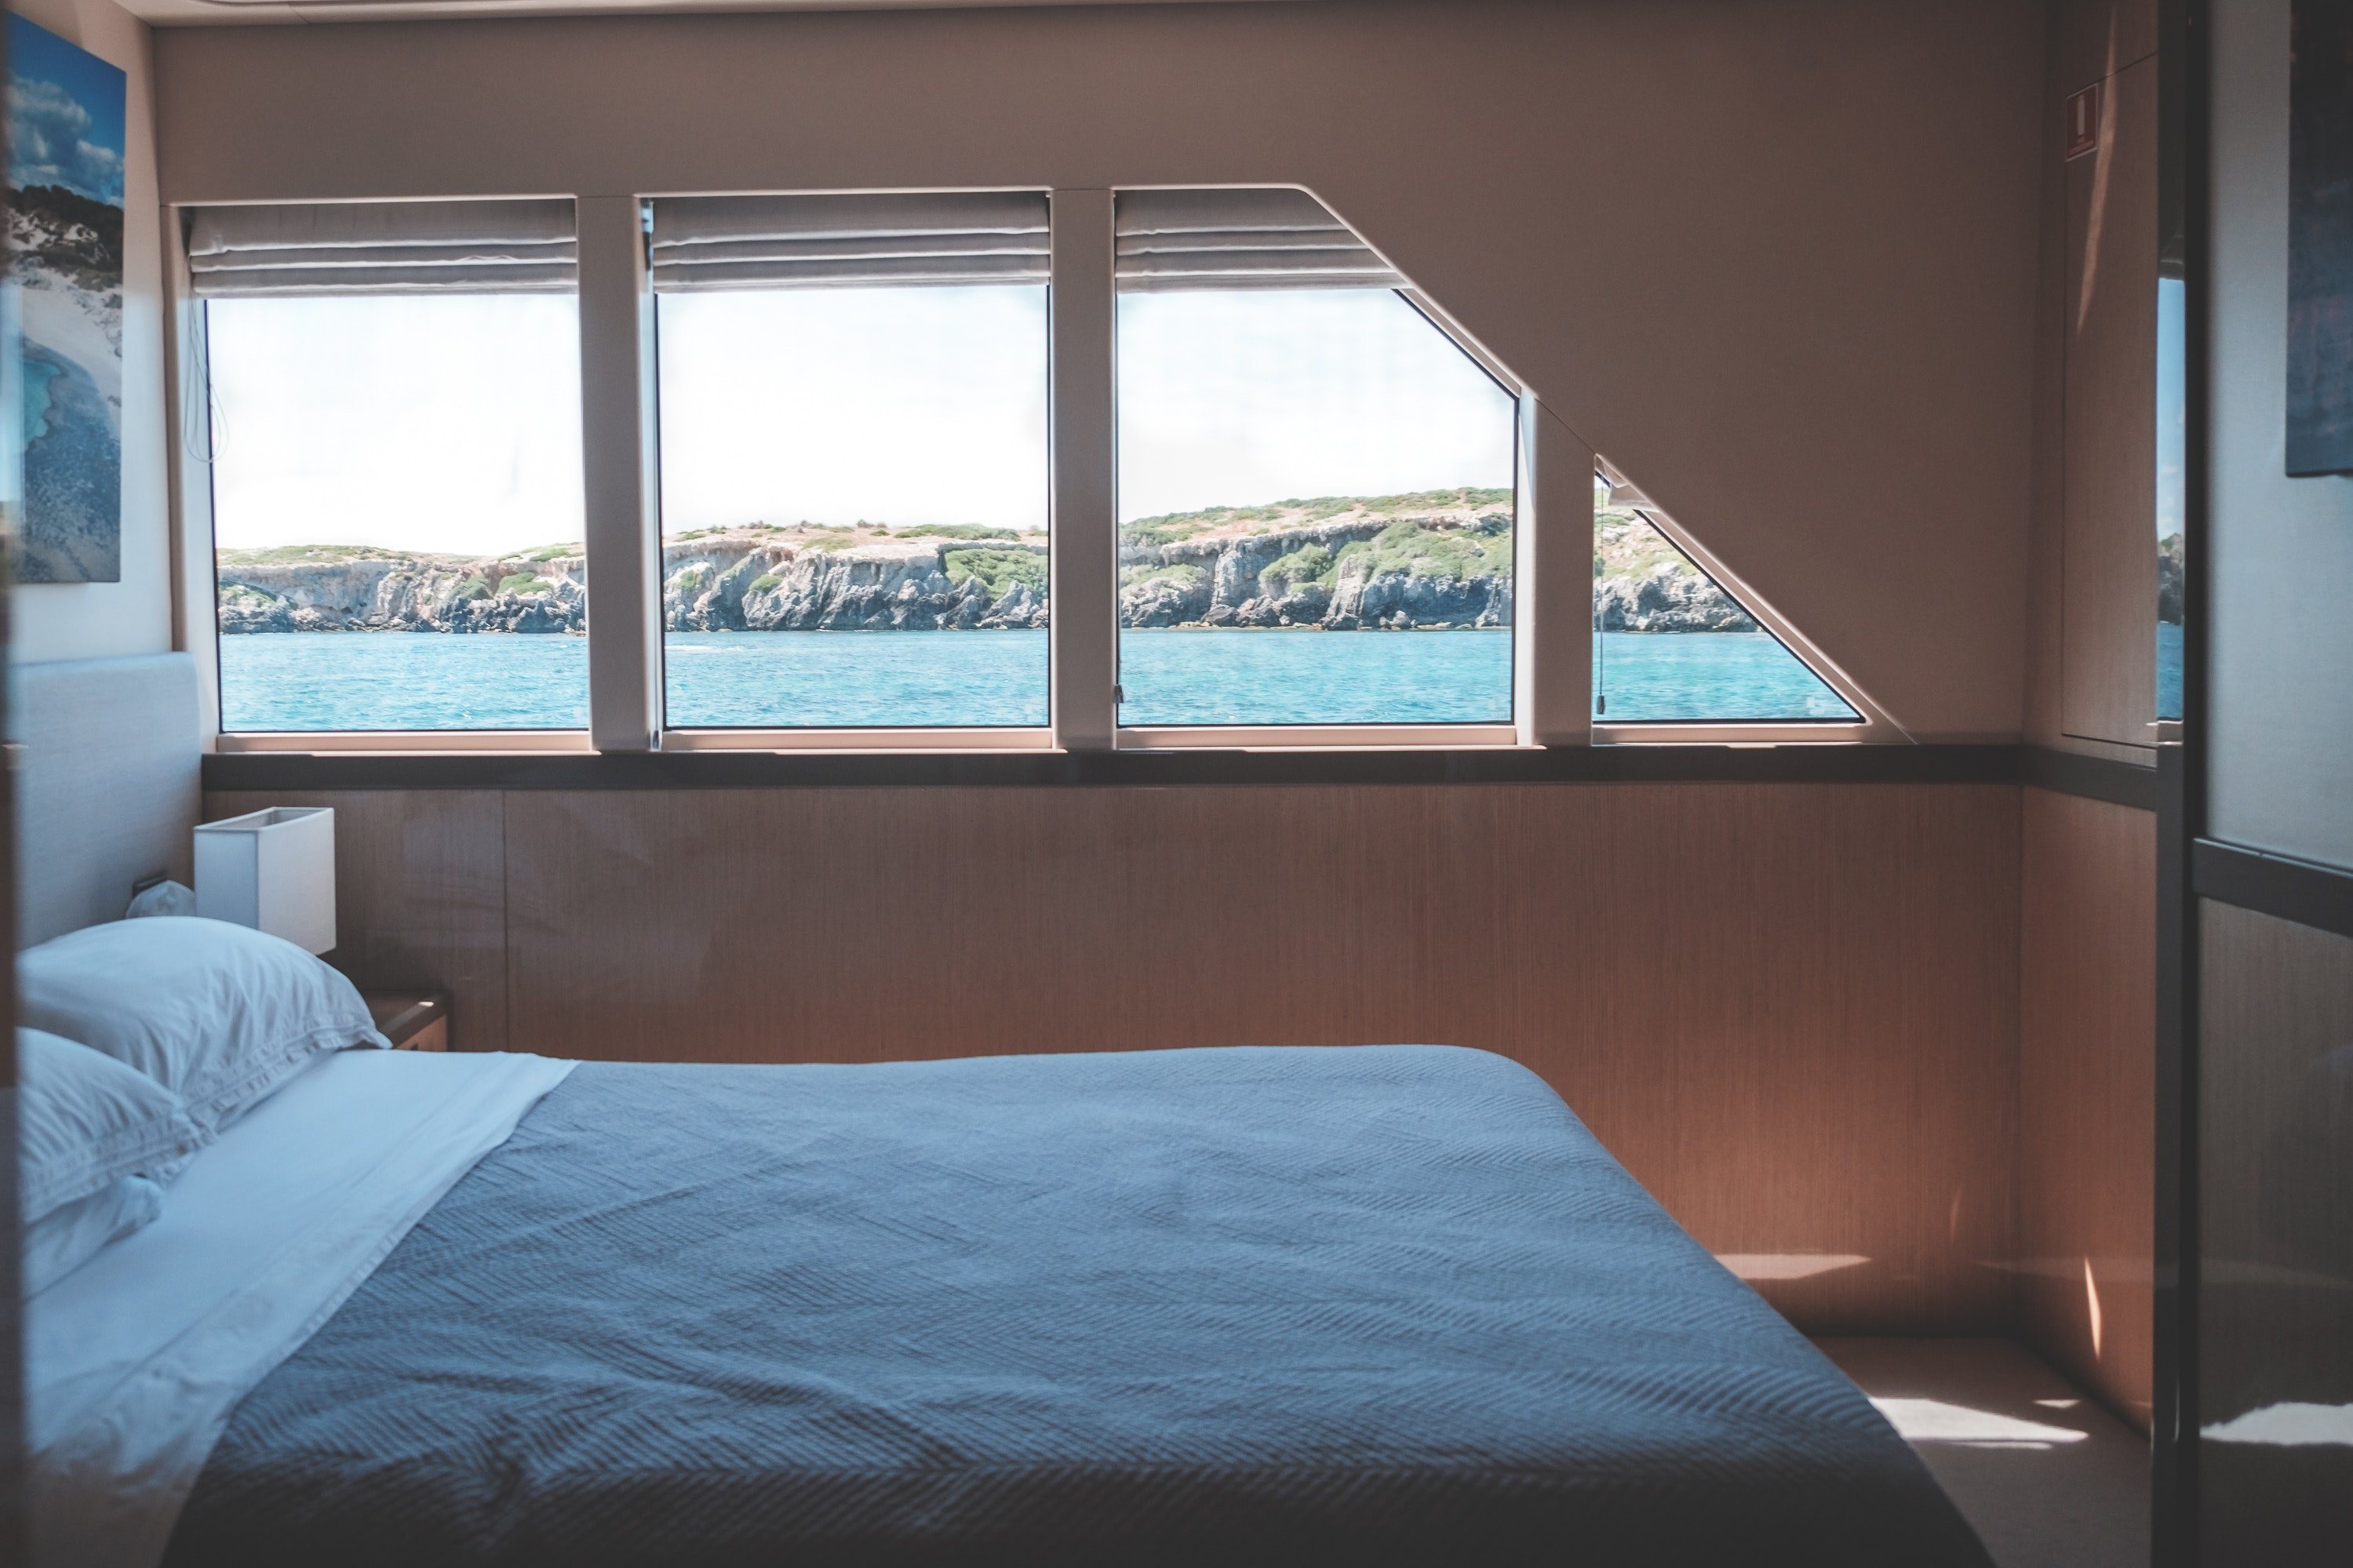 Staterooms are private rooms for guests in cruise ships | Photo by Lachlan Ross from Pexels